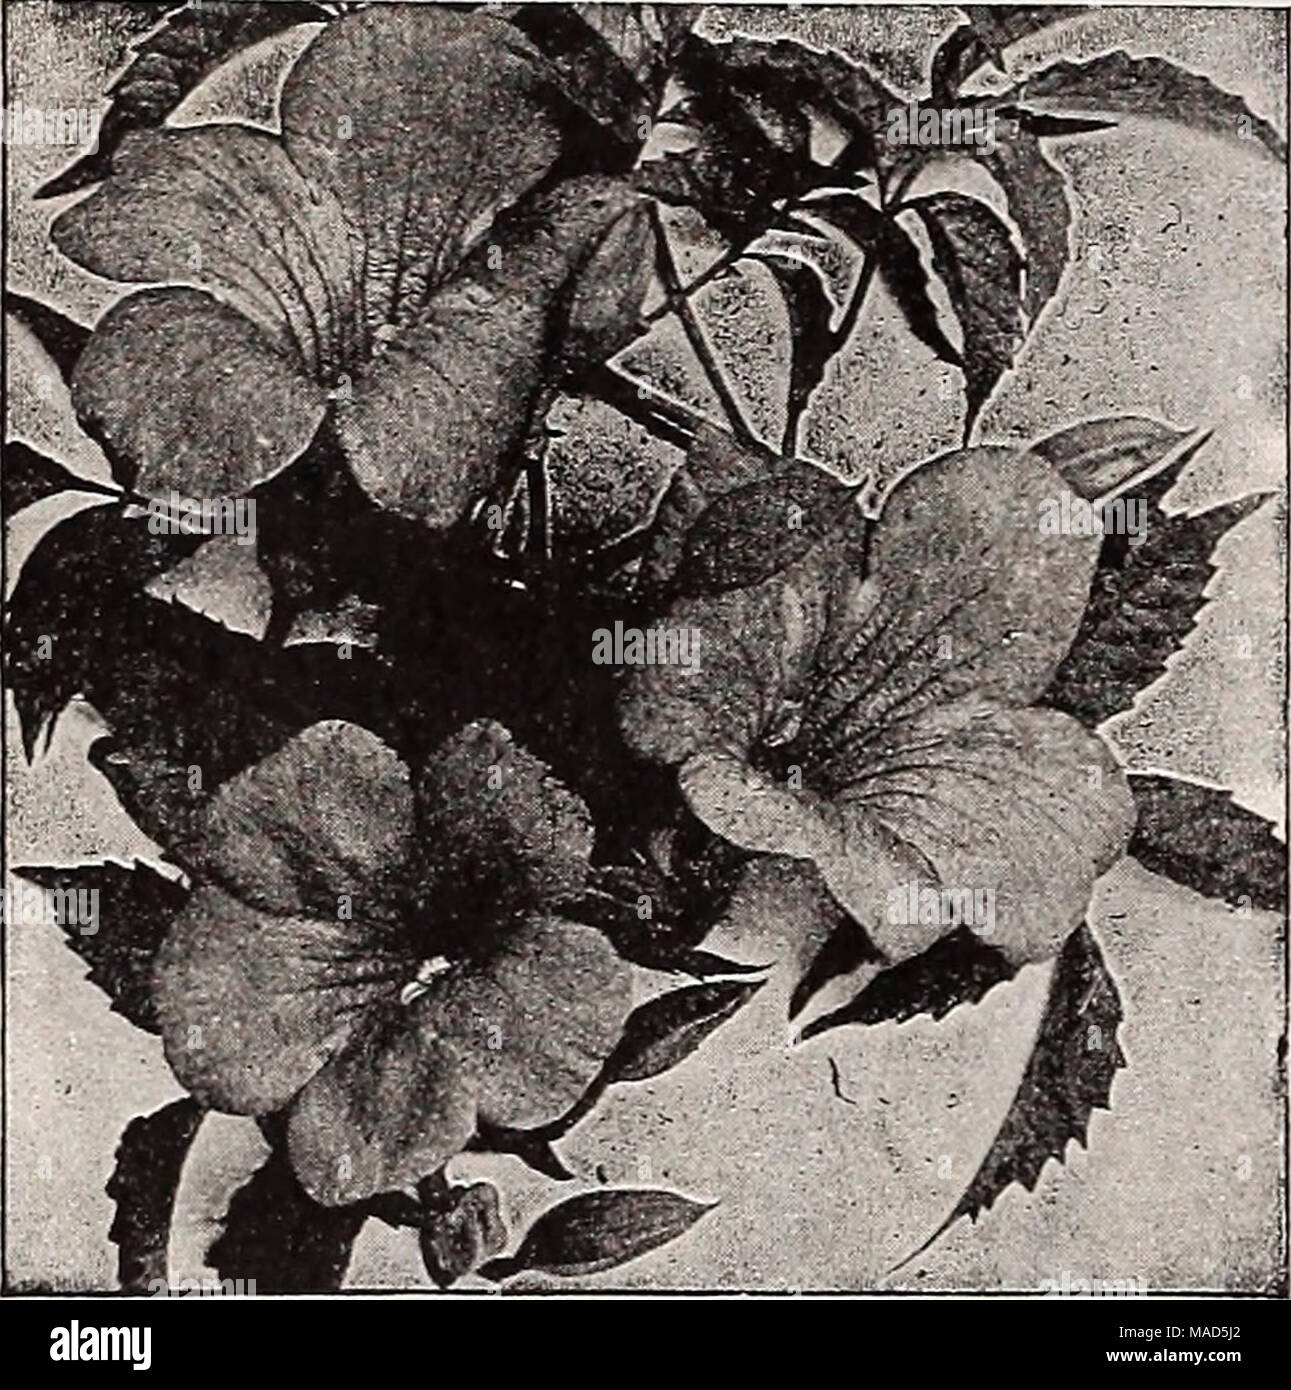 . Dreer's wholesale catalog for florists : autumn 1938 edition . Bignonia grandiflora, lime. Gallen Bignonia—Trumpet Creeper Grandiflora, Mme. Gallen. A beautiful large-flowered variety bearing a profusion of tawny orange-red blooms througliout the summer and early fall. Strong 2-year-old field plants 50c each; $5.00 per doz. Badicans. Strong plants, $3.50 per doz.; $25.00 per 100. Celastrus scandens Bitter Sweet, Wax Work Strong plants, $3.00 per doz.; $20.00 per 100. Clematis montana undulata Anemone-Flowered Clematis A magnificent and rare hardy climber which always attracts attention on ac Stock Photo